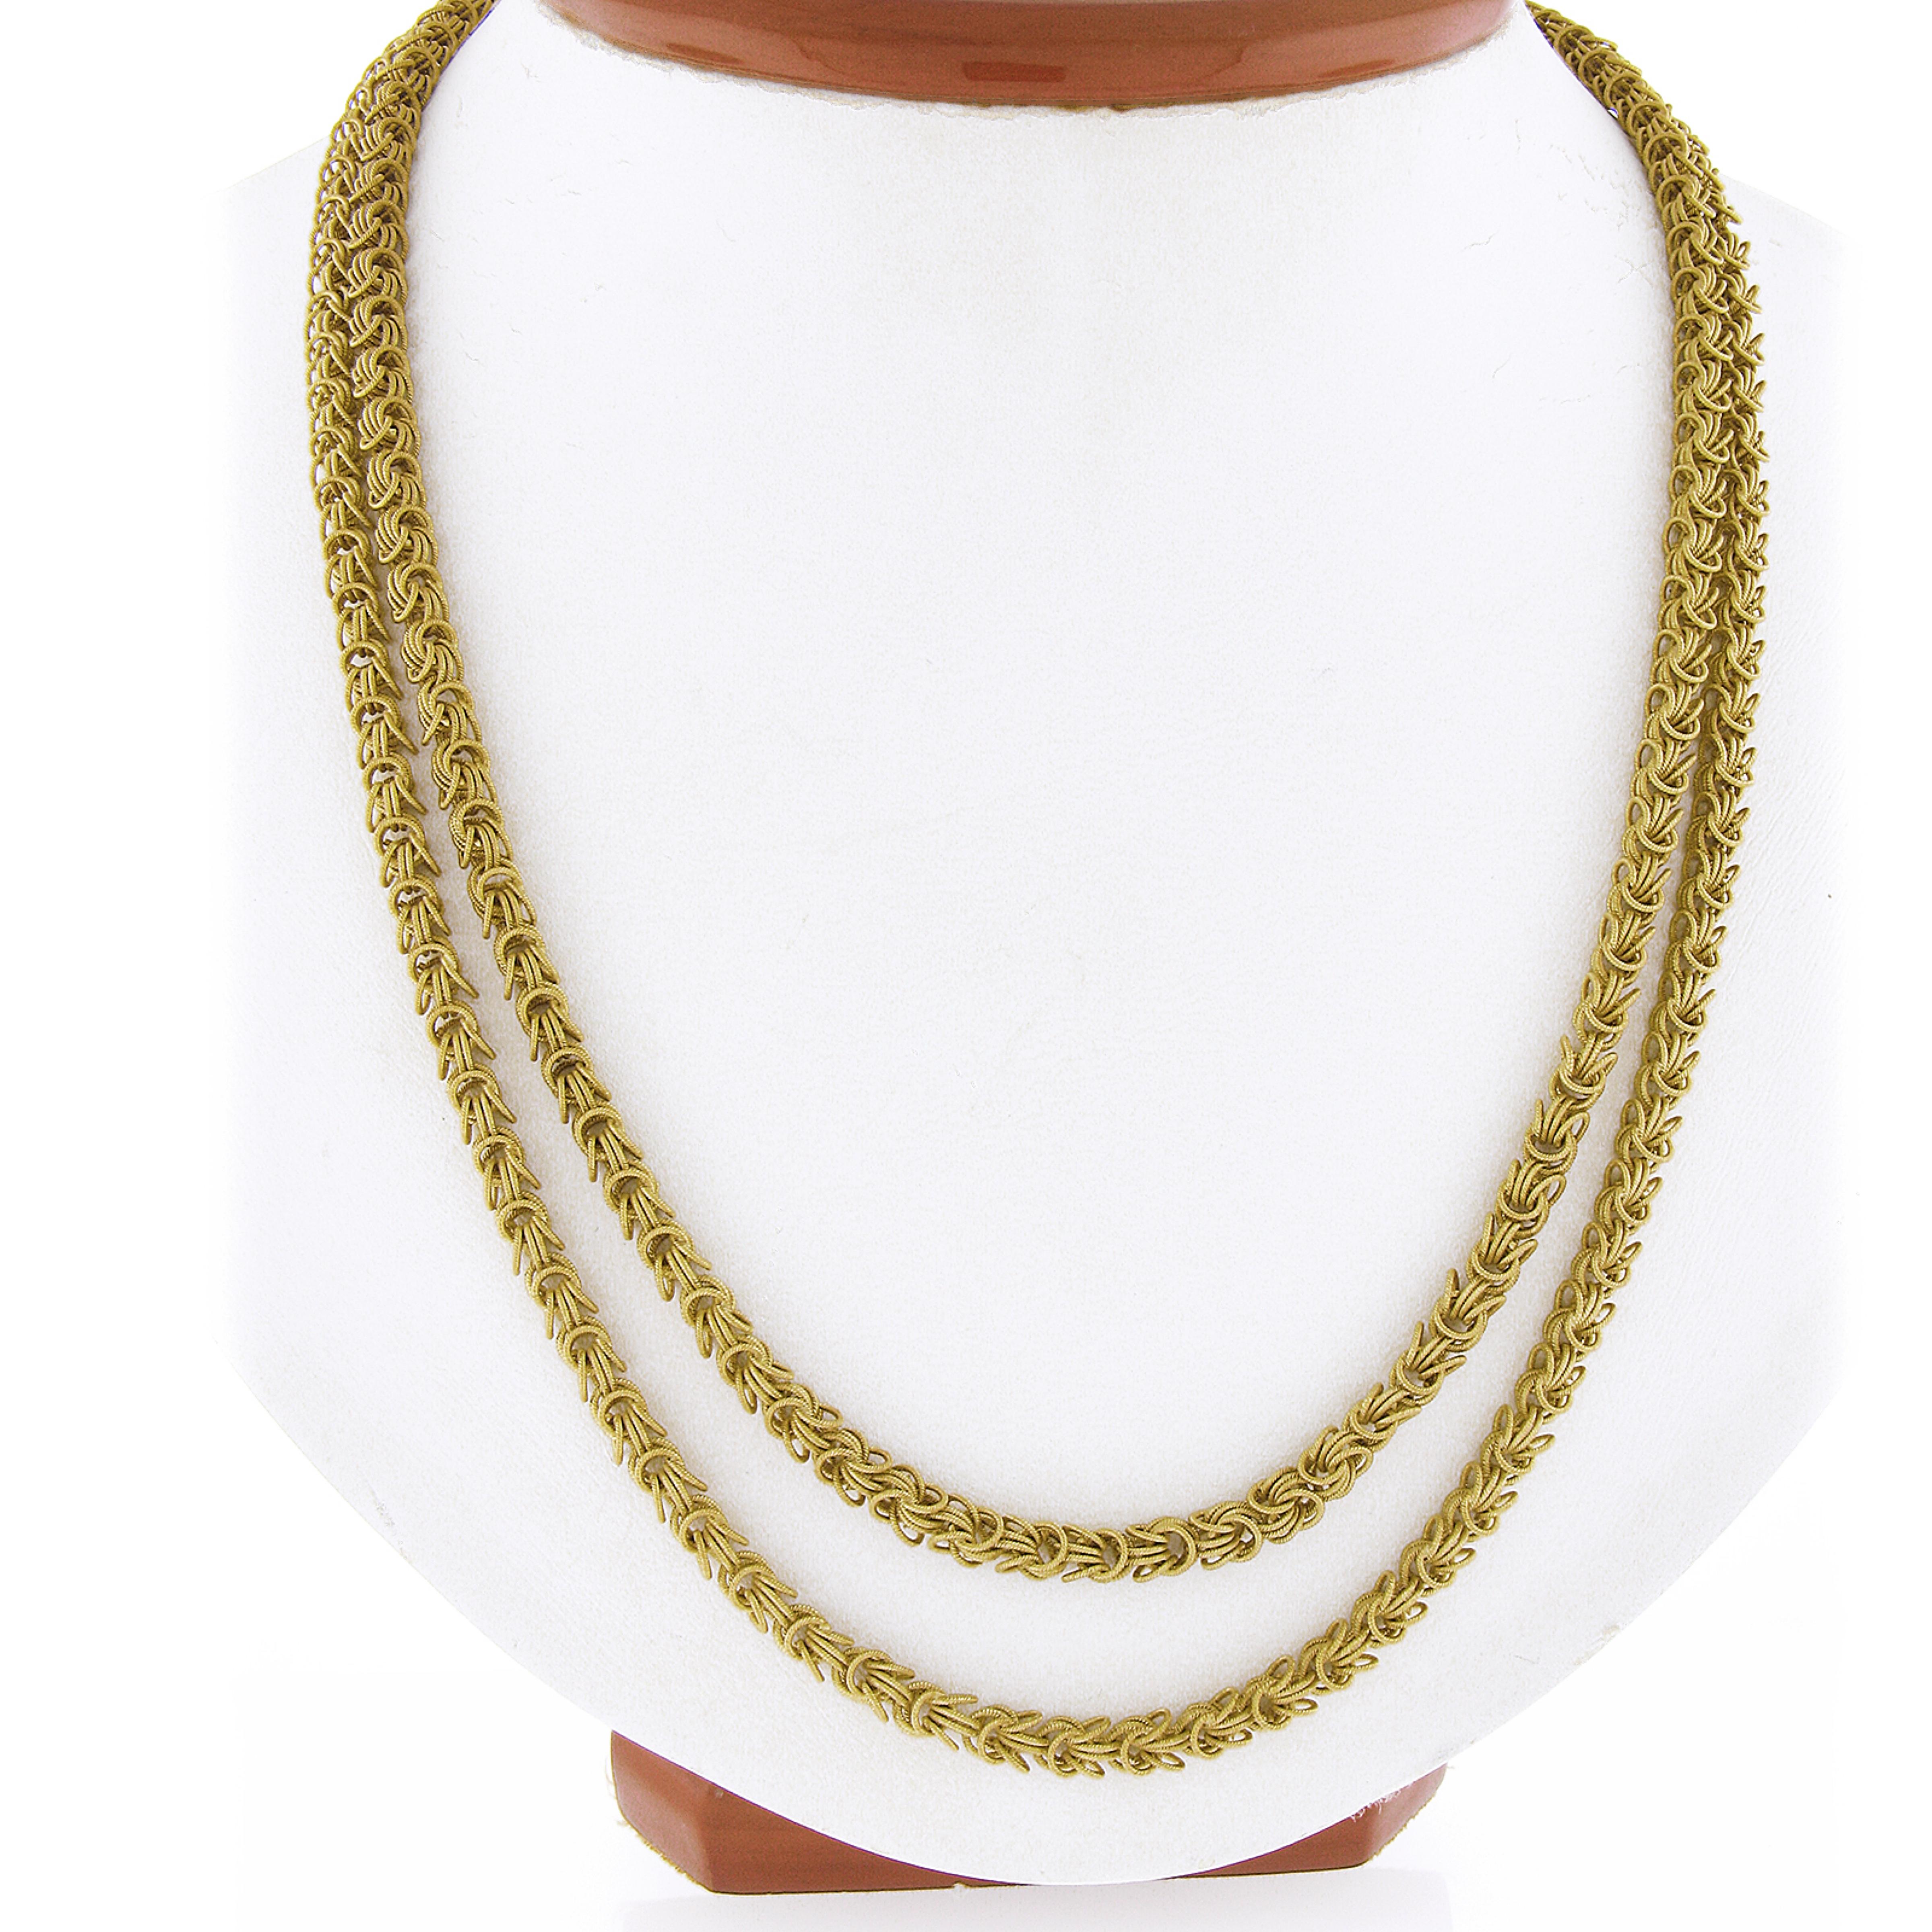 Material: Solid 18k Yellow Gold
Weight: 54.84  Grams
Chain Type: Textured Fancy Cable Link
Chain Length: 41 Inches
Chain Thickness: 4.5mm
Clasp: Barrel Clasp w/ Safety Latch
Stamp: ITALY - 637MI
Condition: Shows some light wear. Original finish &